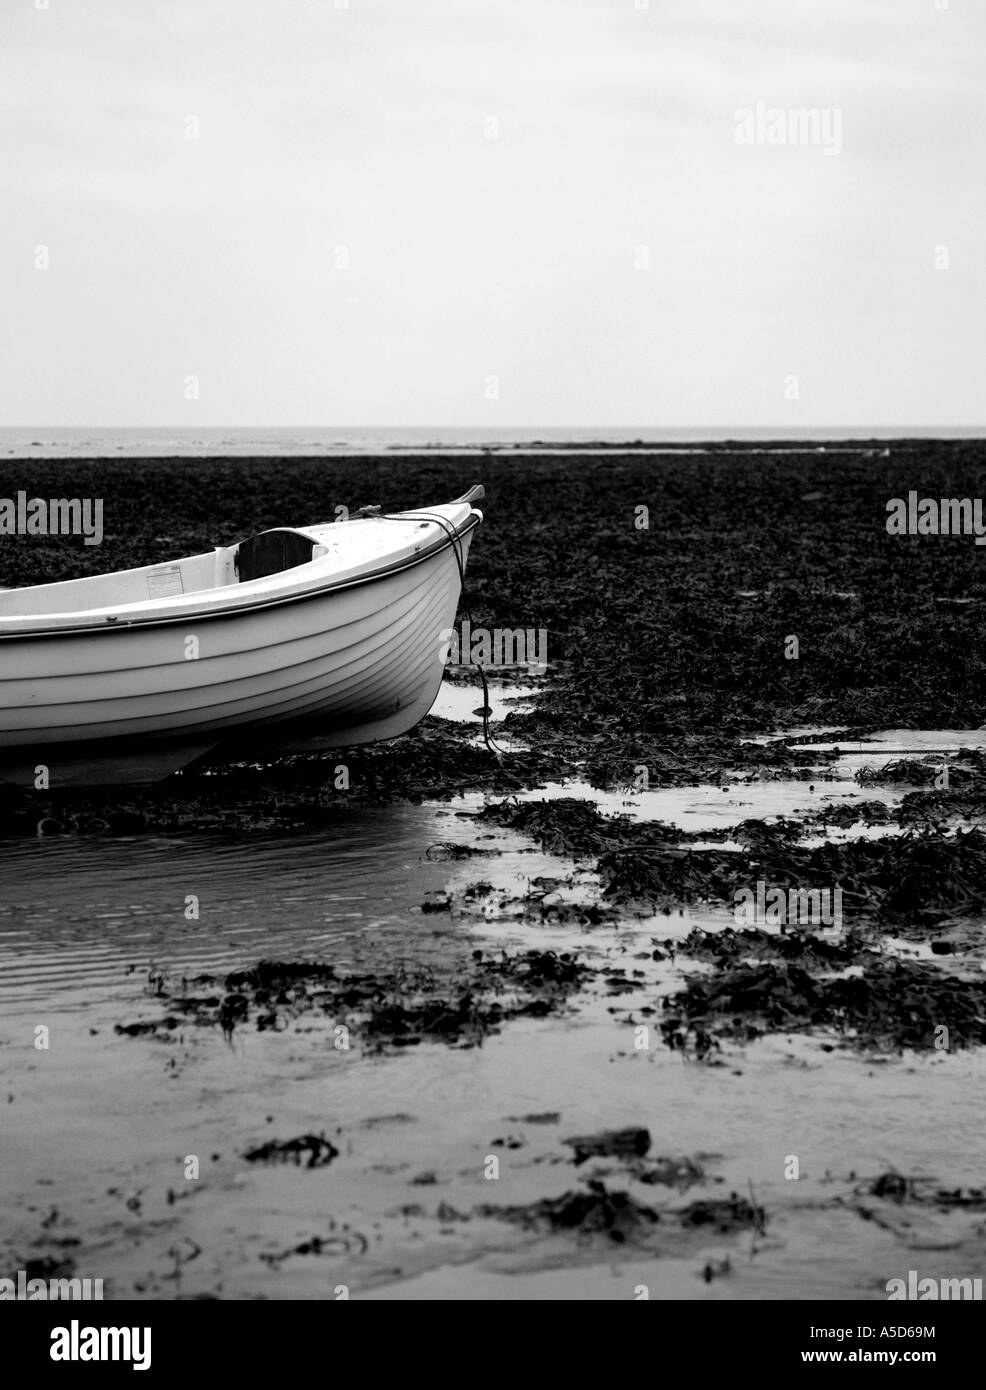 White boat on a seaweed covered beach taken in black and white Stock Photo